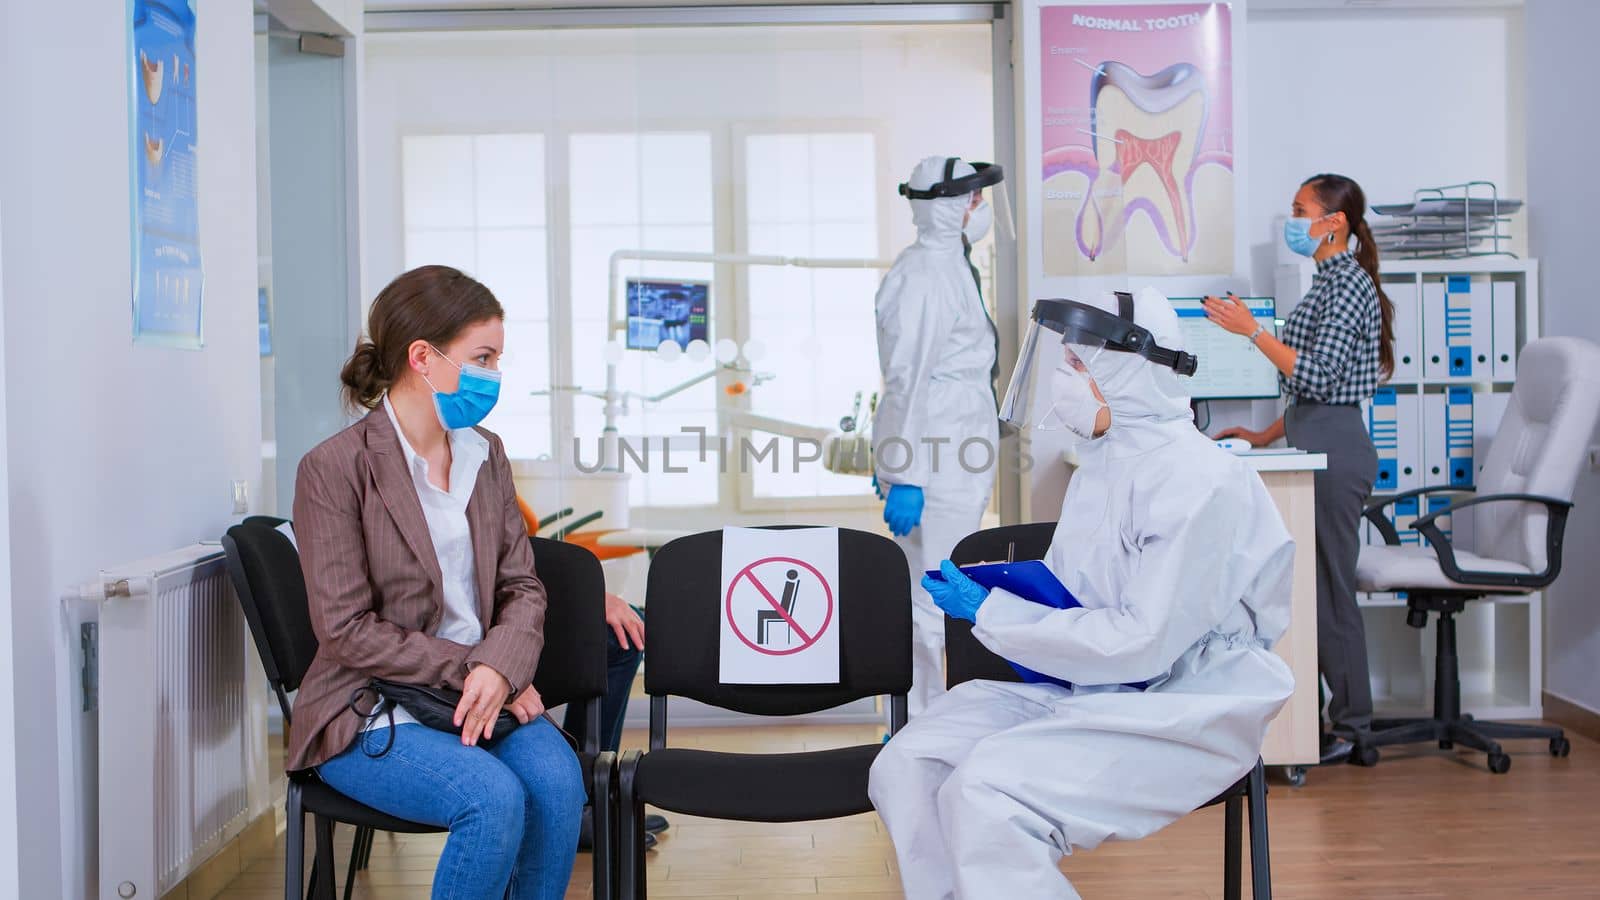 Dentist nurse with protection equipment talking with patient before consultation during covid-19 epidemic sitting on chairs in waiting area keeping distance. Concept of new normal dentist visit.